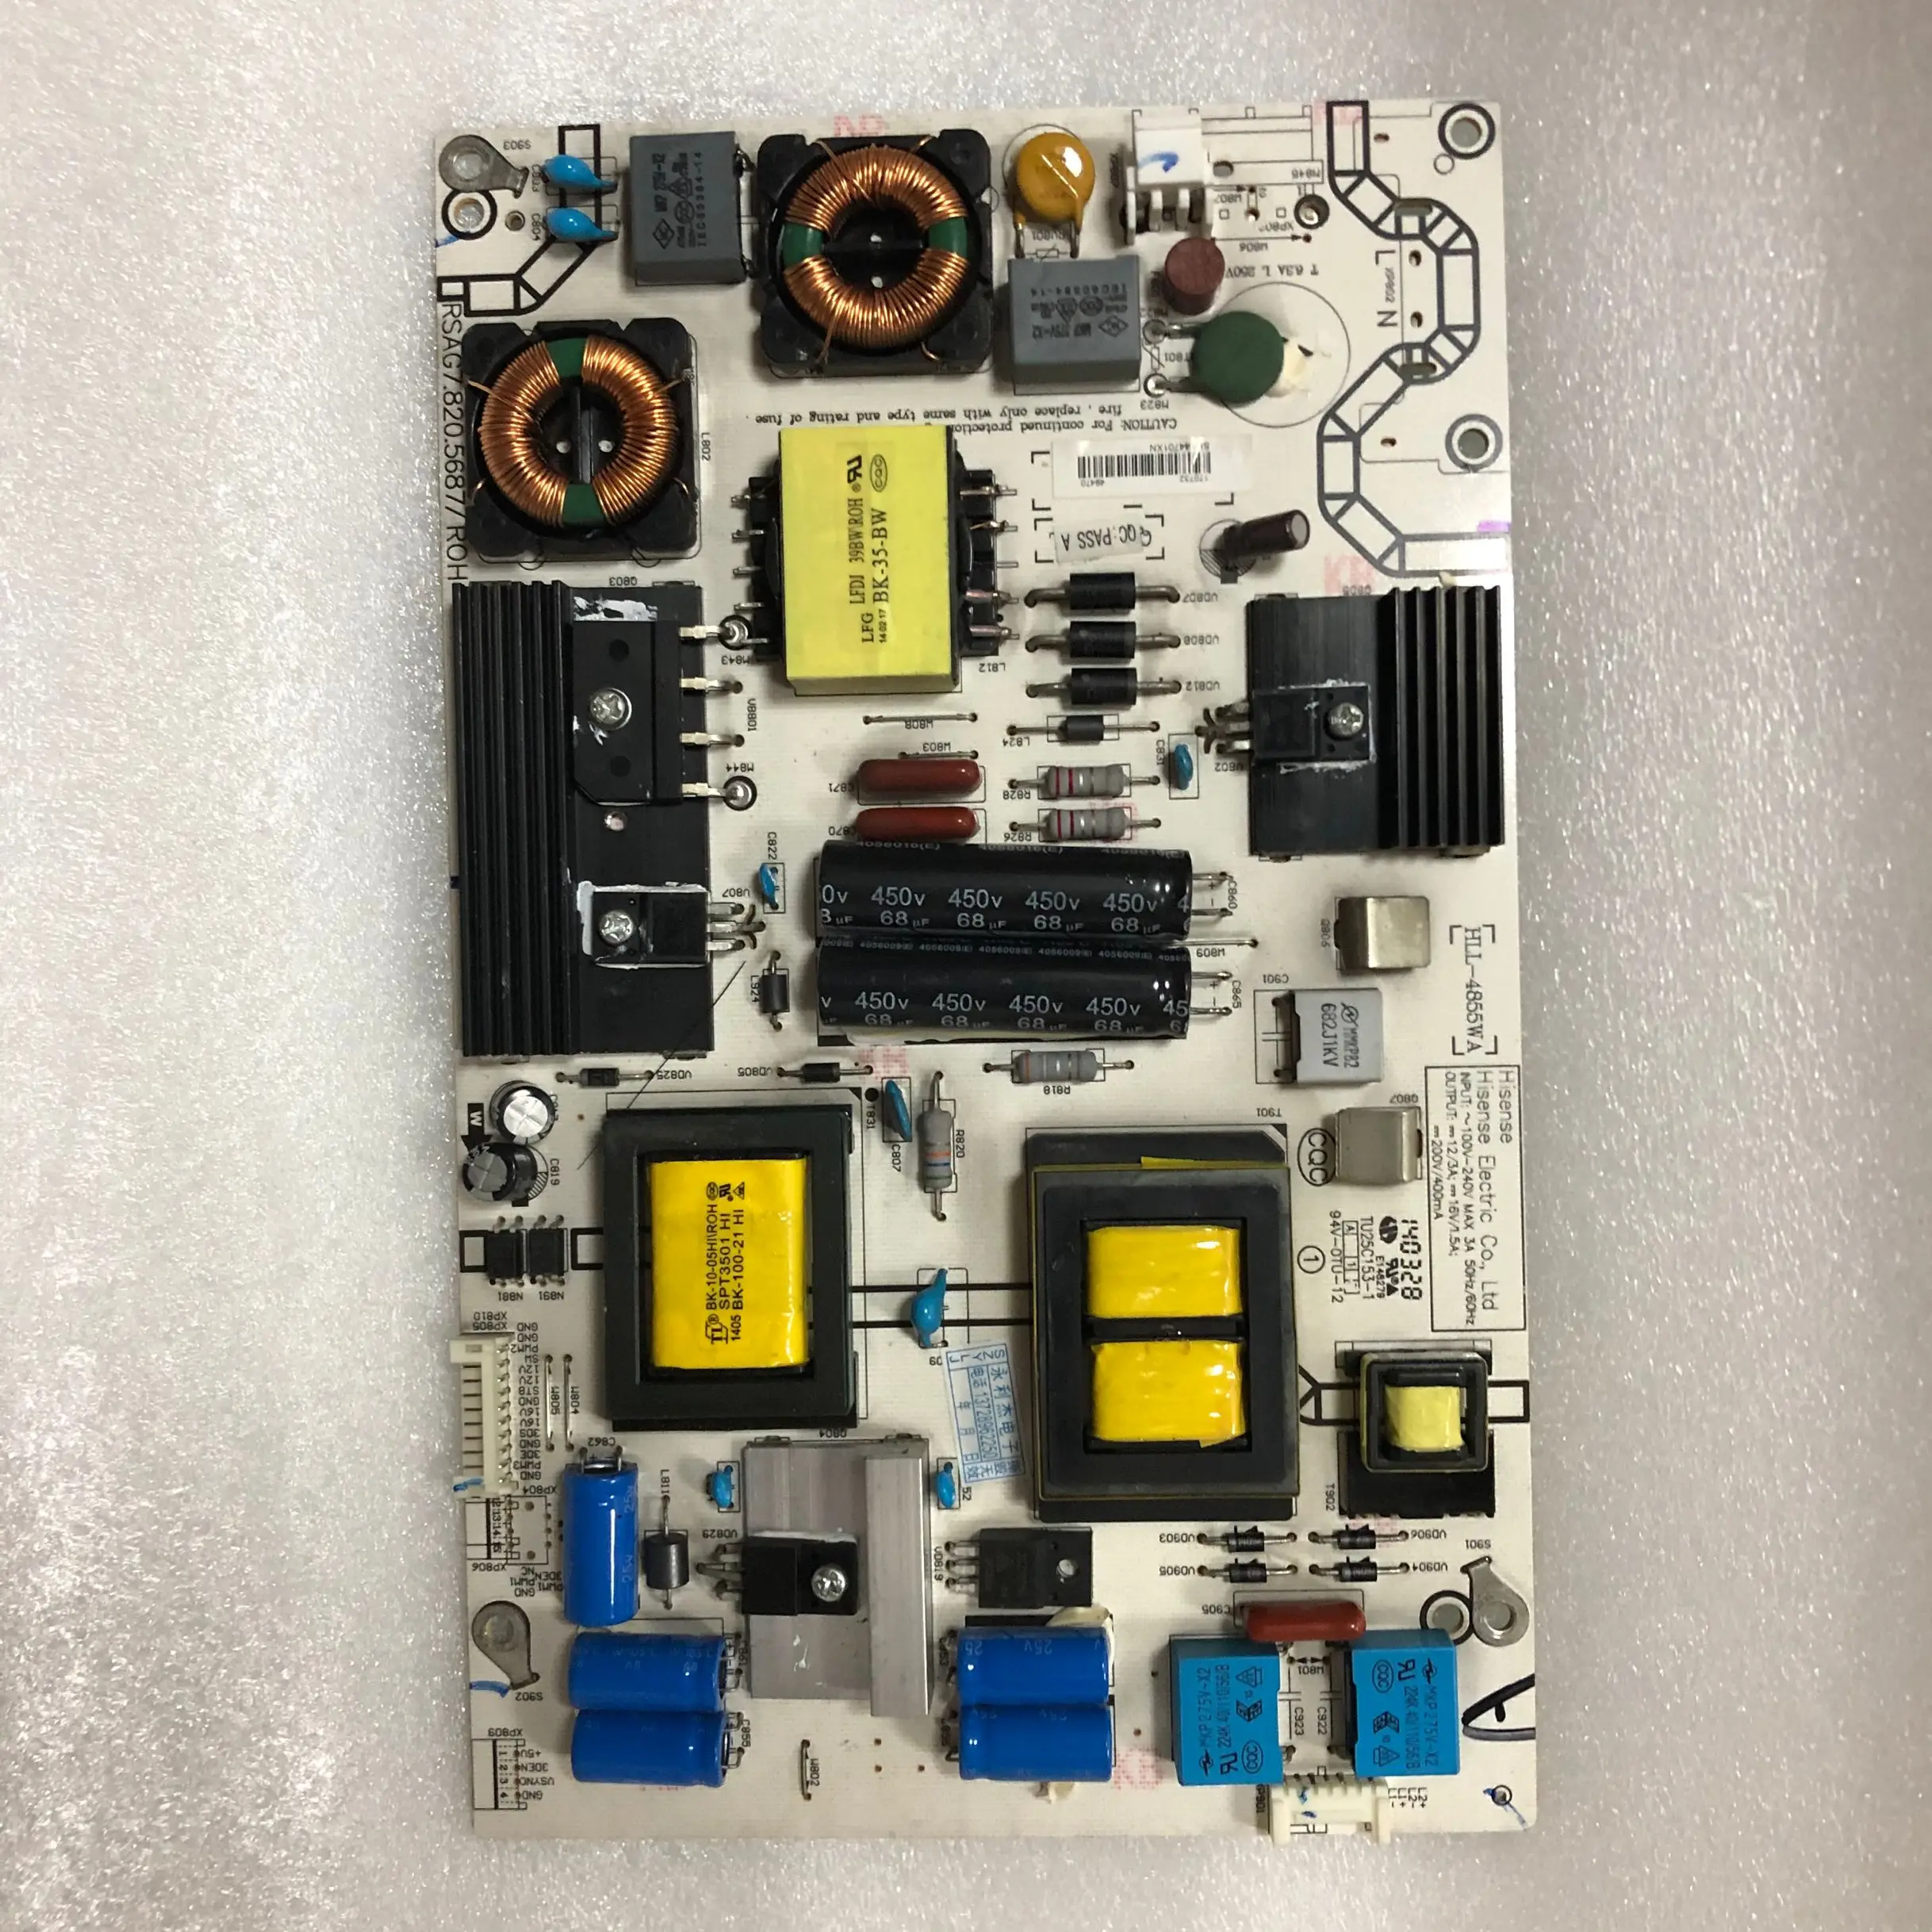 

RSAG7.820.5687 ROH Power Supply RSAG7.820.5687/ROH Professional TV parts Original Power Support Board HLL-4855